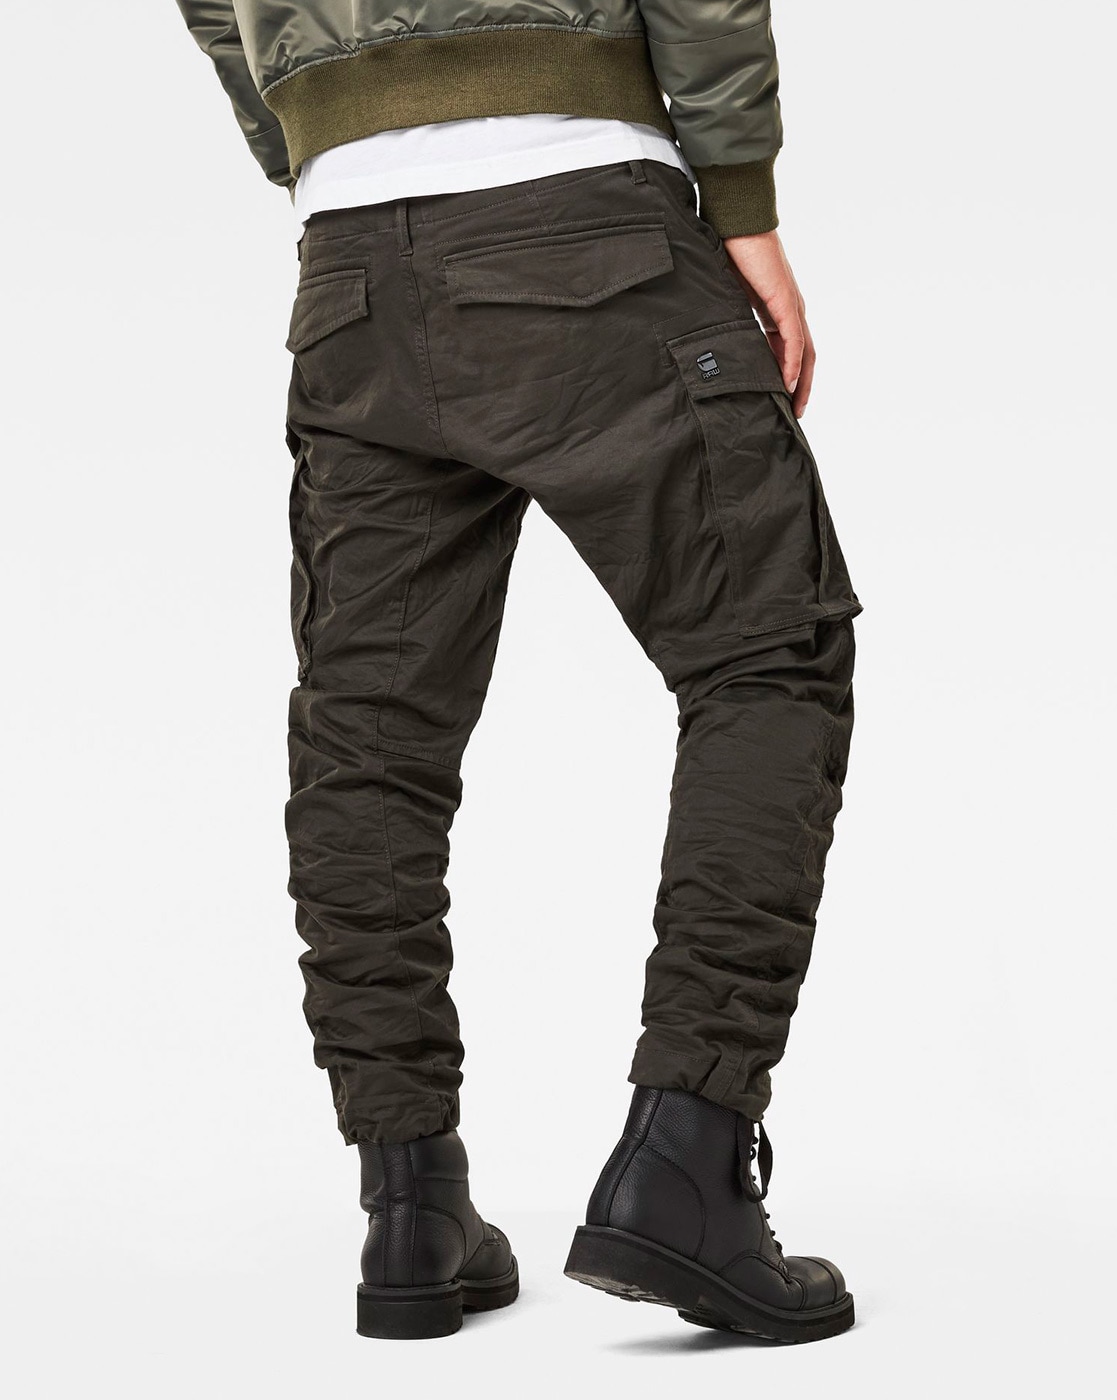 G Star Raw Rovic Tapered Cargo Trousers | Mainline Menswear United States